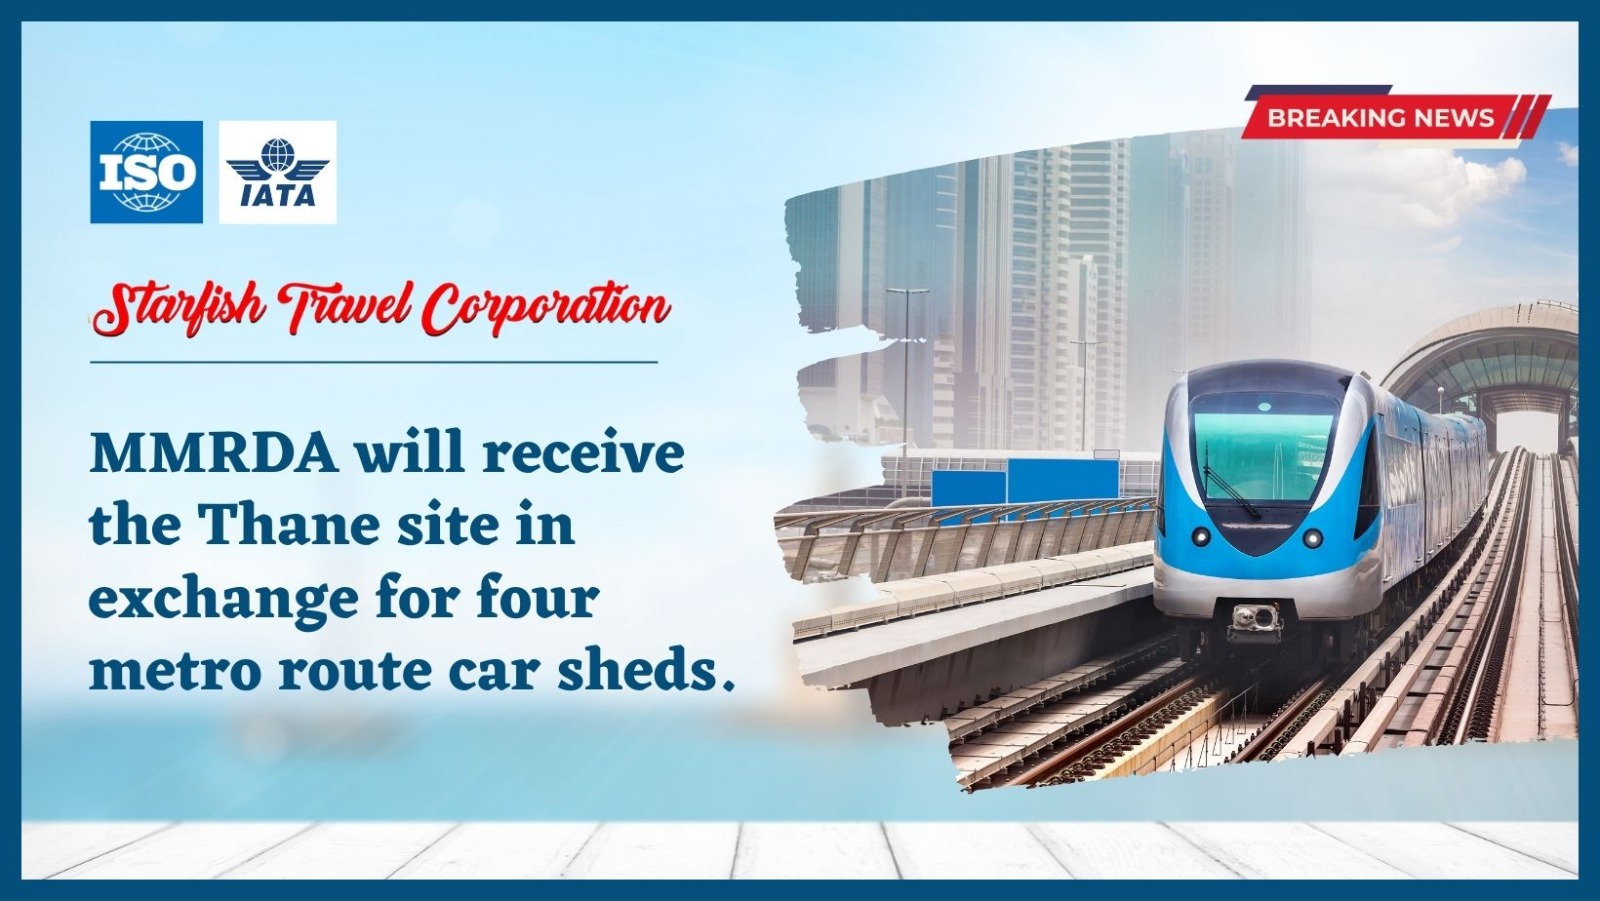 MMRDA will receive the Thane site in exchange for four metro route car sheds.